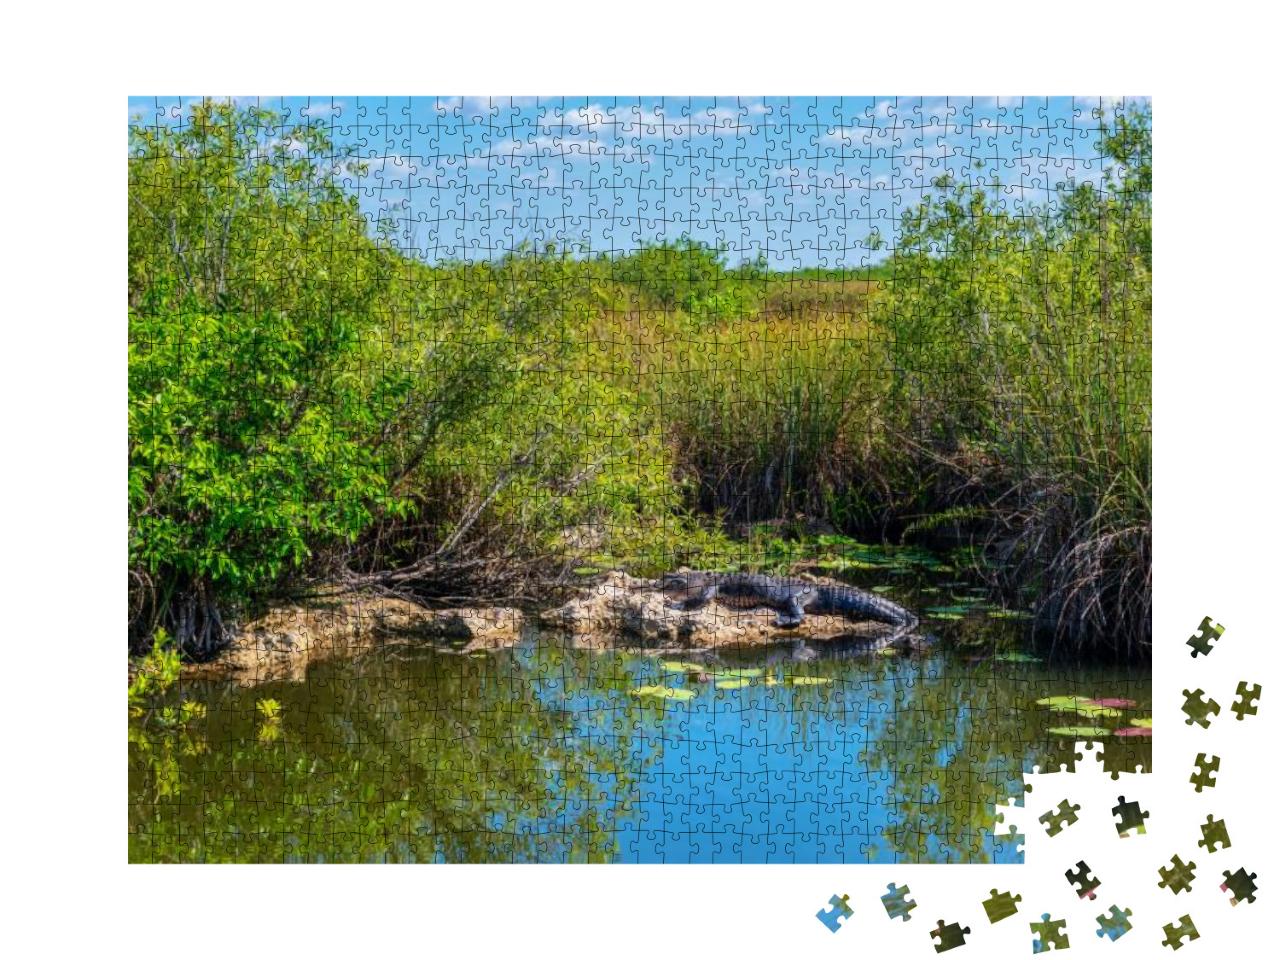 Sunbathing Alligator in Everglades National Park Florida... Jigsaw Puzzle with 1000 pieces